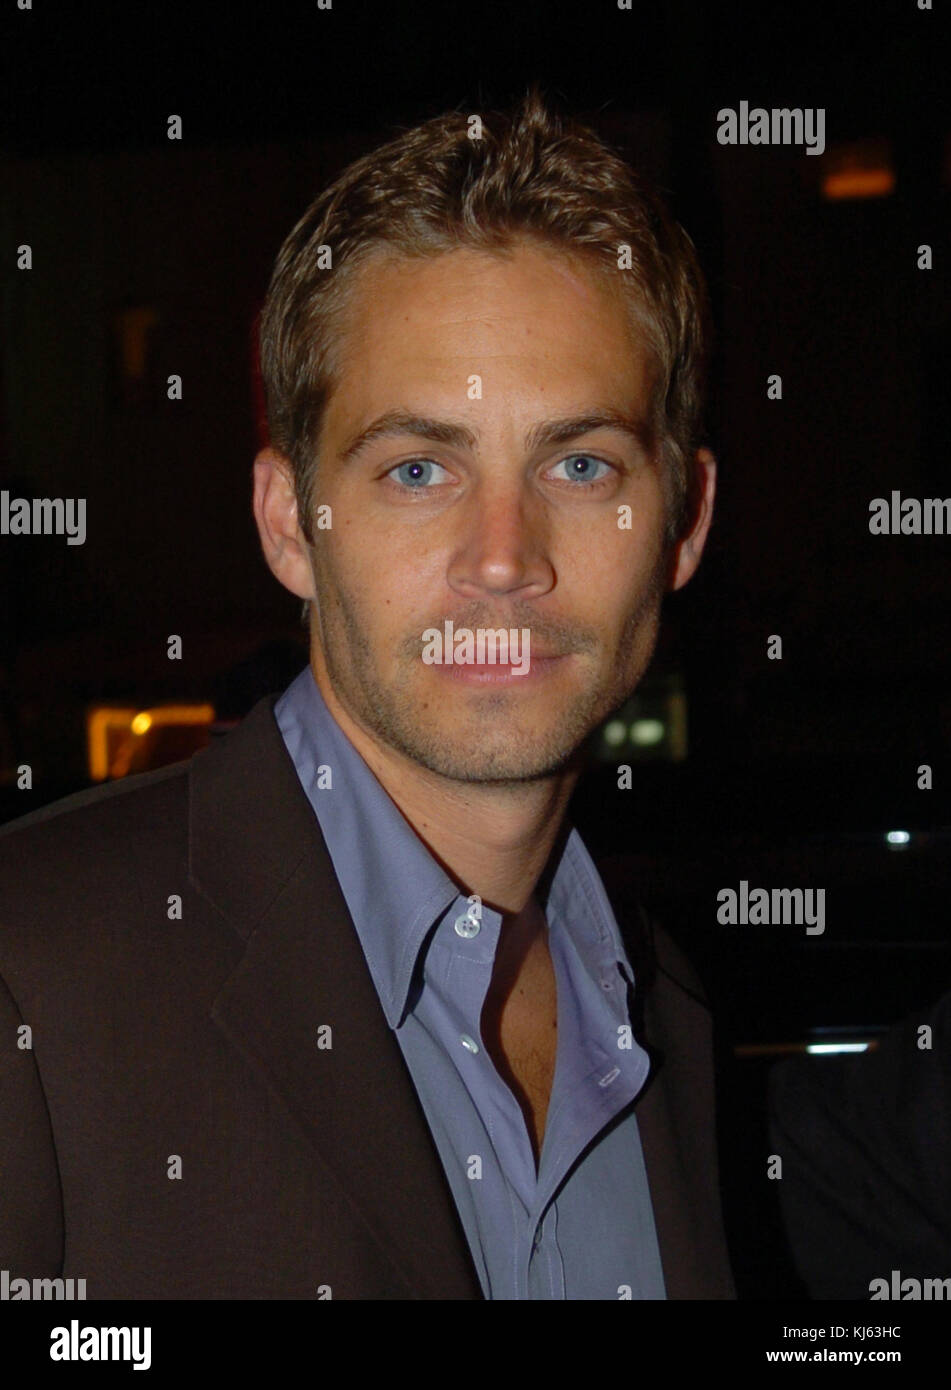 MIAMI, FL - NOVEMBER 30: Actor Paul Walker, who shot to fame as star of the high-octane street racing franchise 'Fast & Furious,' died Saturday in a car crash in Southern California. He was 40. Walker's publicist Ame van Iden confirmed his death, but said she could not elaborate beyond statements posted on Walker's official Twitter and Facebook accounts. Walker was a passenger in a friend's car and both were attending a charity event for his organization, Reach Out Worldwide, in the community of Valencia in Santa Clarita, about 30 miles north of Hollywood. The website for the charity said the  Stock Photo